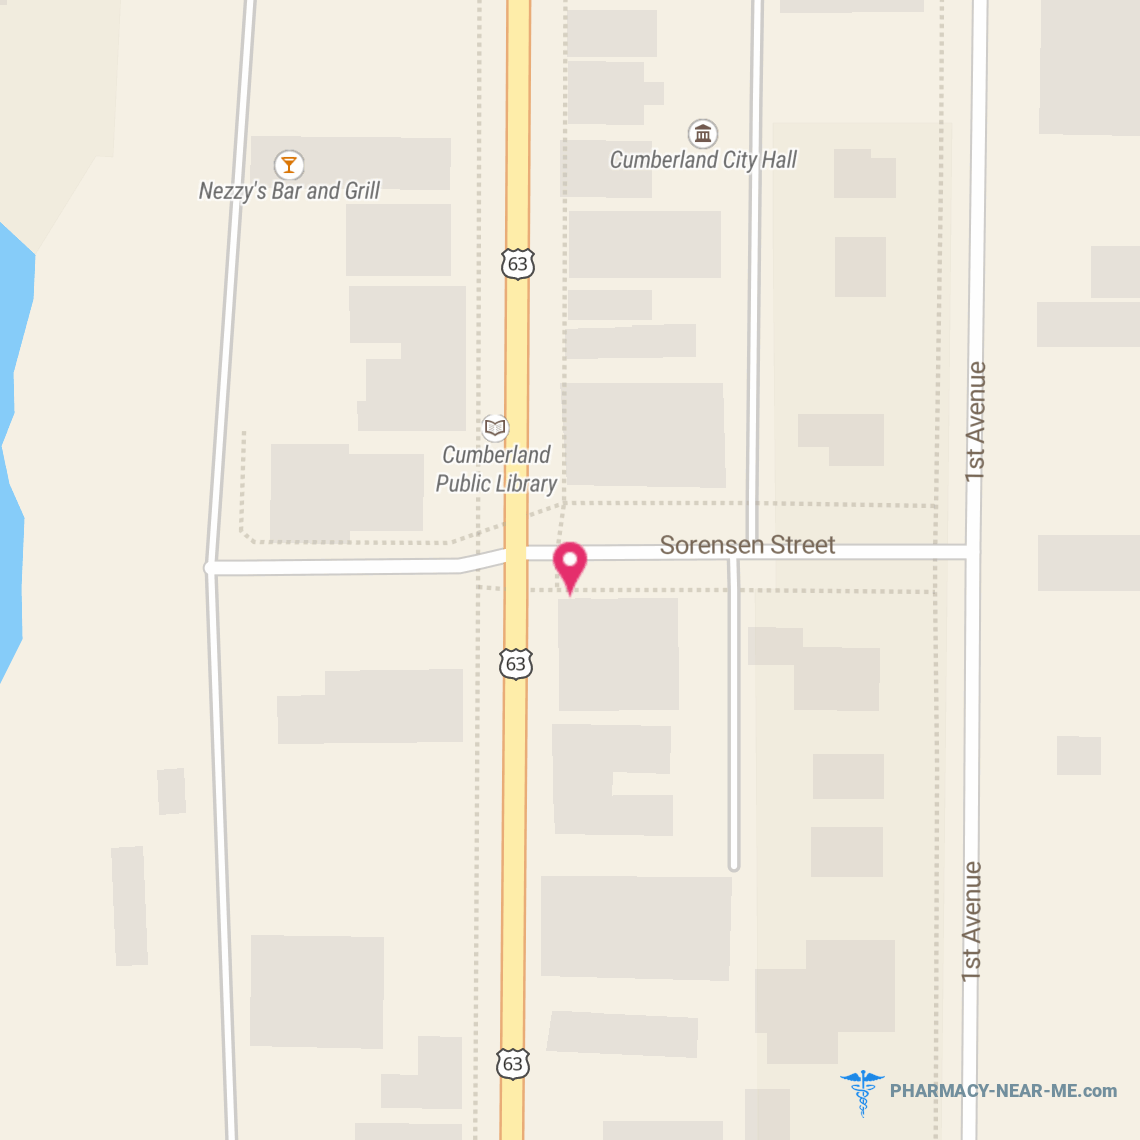 SCHNEIDER DRUG - Pharmacy Hours, Phone, Reviews & Information: 1296 2nd Avenue, Cumberland, Wisconsin 54829, United States